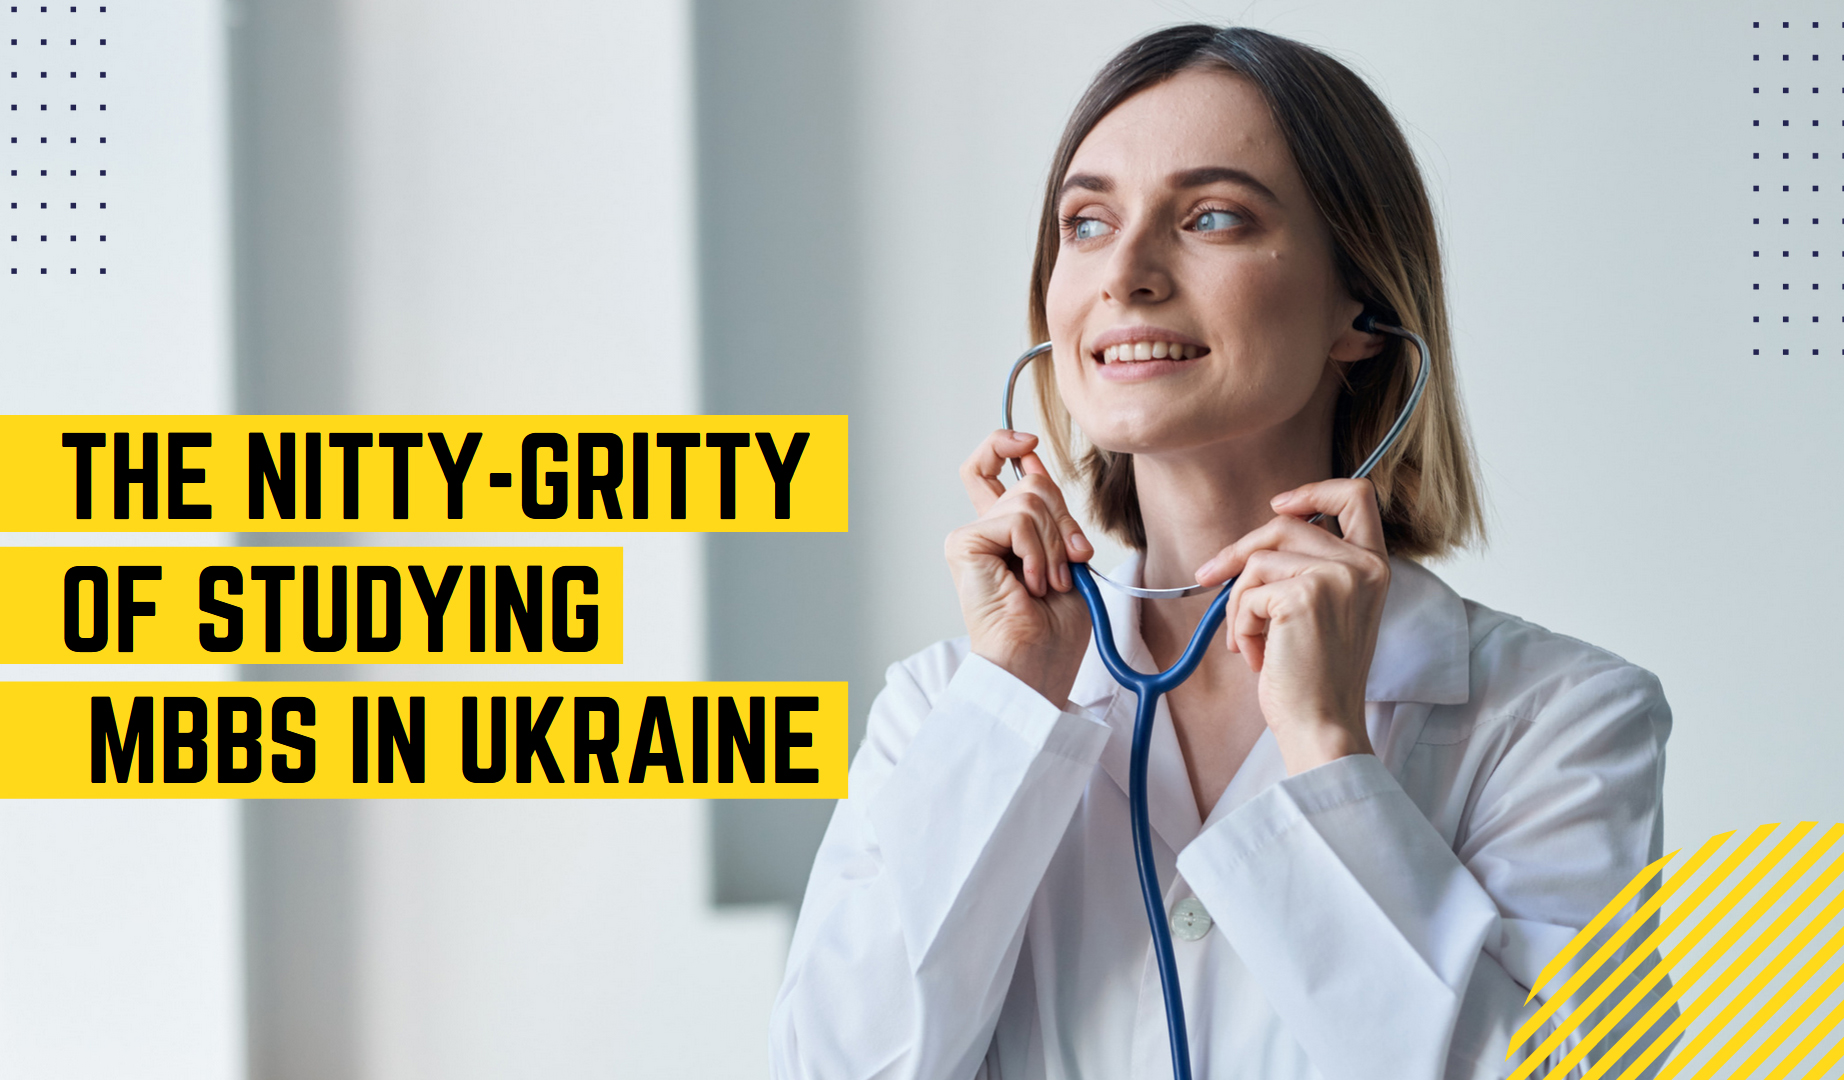 Study MBBS in Ukraine & Secure Your Future